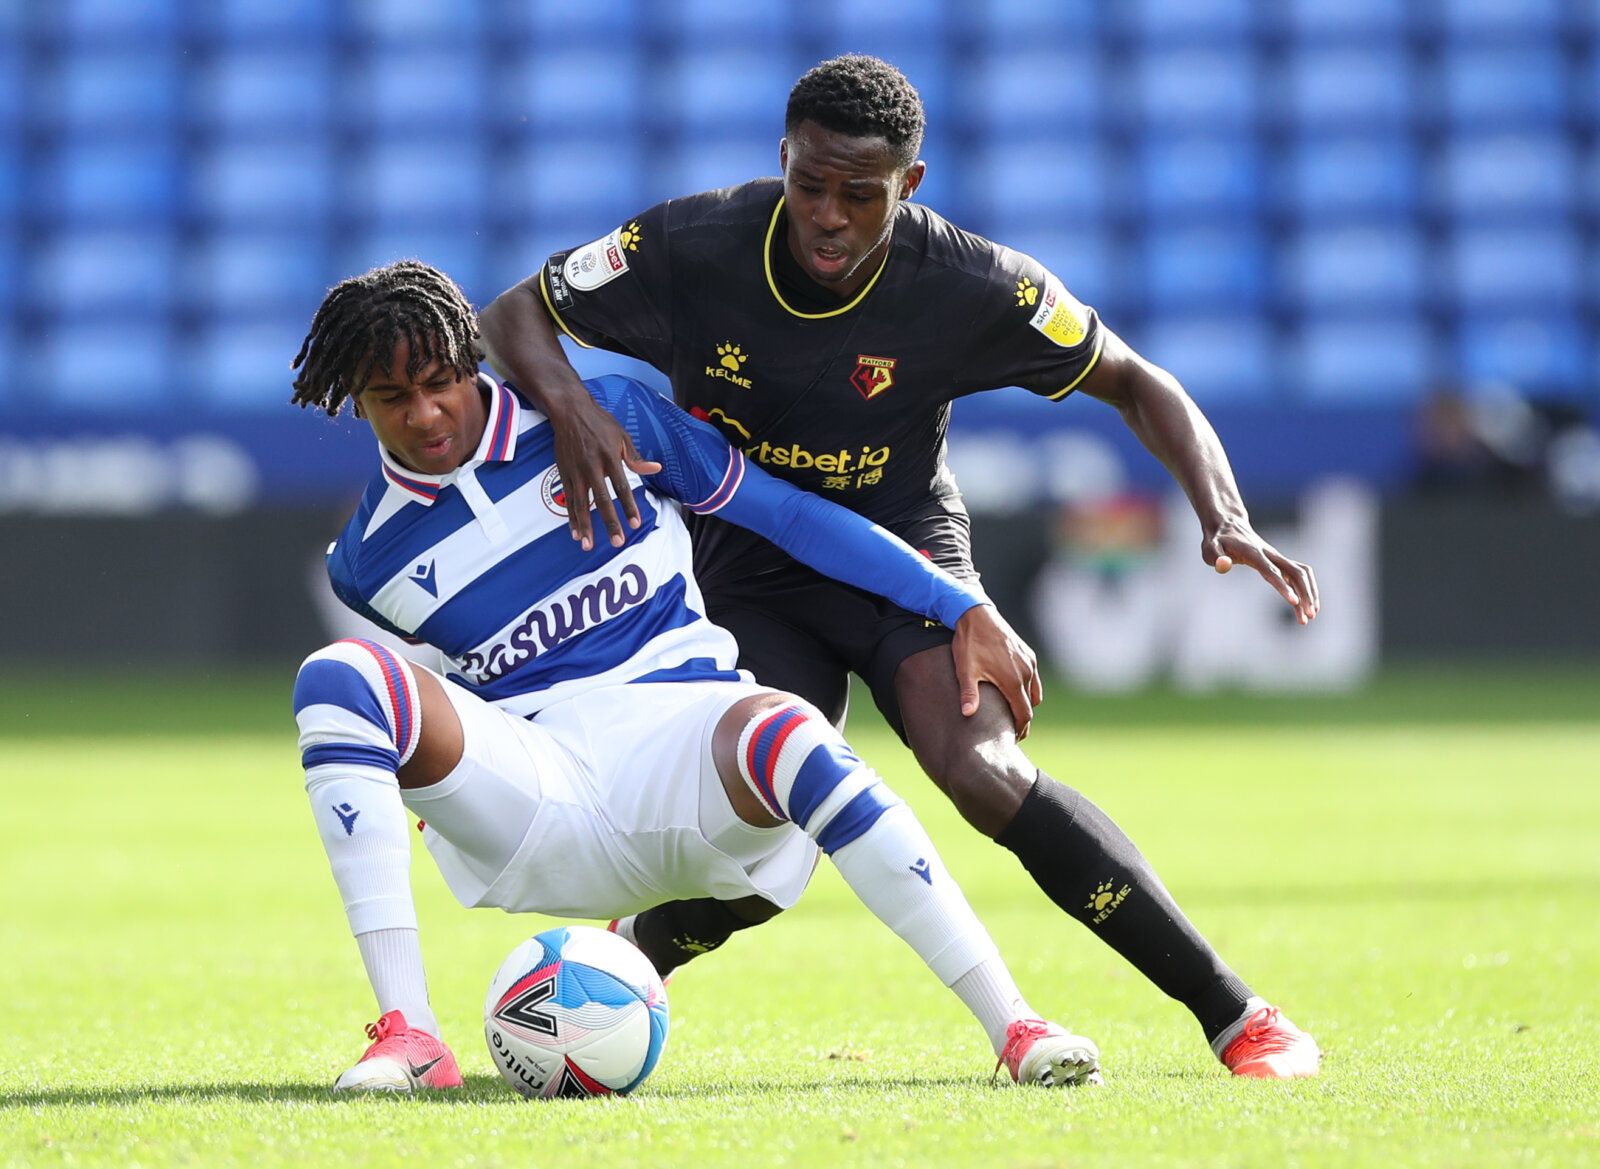 Soccer Football - Championship - Reading v Watford - Madejski Stadium, Reading, Britain - October 3, 2020 Reading's Michael Olise in action with Watford's Jeremy Ngakia Action Images/Peter Cziborra EDITORIAL USE ONLY. No use with unauthorized audio, video, data, fixture lists, club/league logos or 'live' services. Online in-match use limited to 75 images, no video emulation. No use in betting, games or single club /league/player publications.  Please contact your account representative for furth